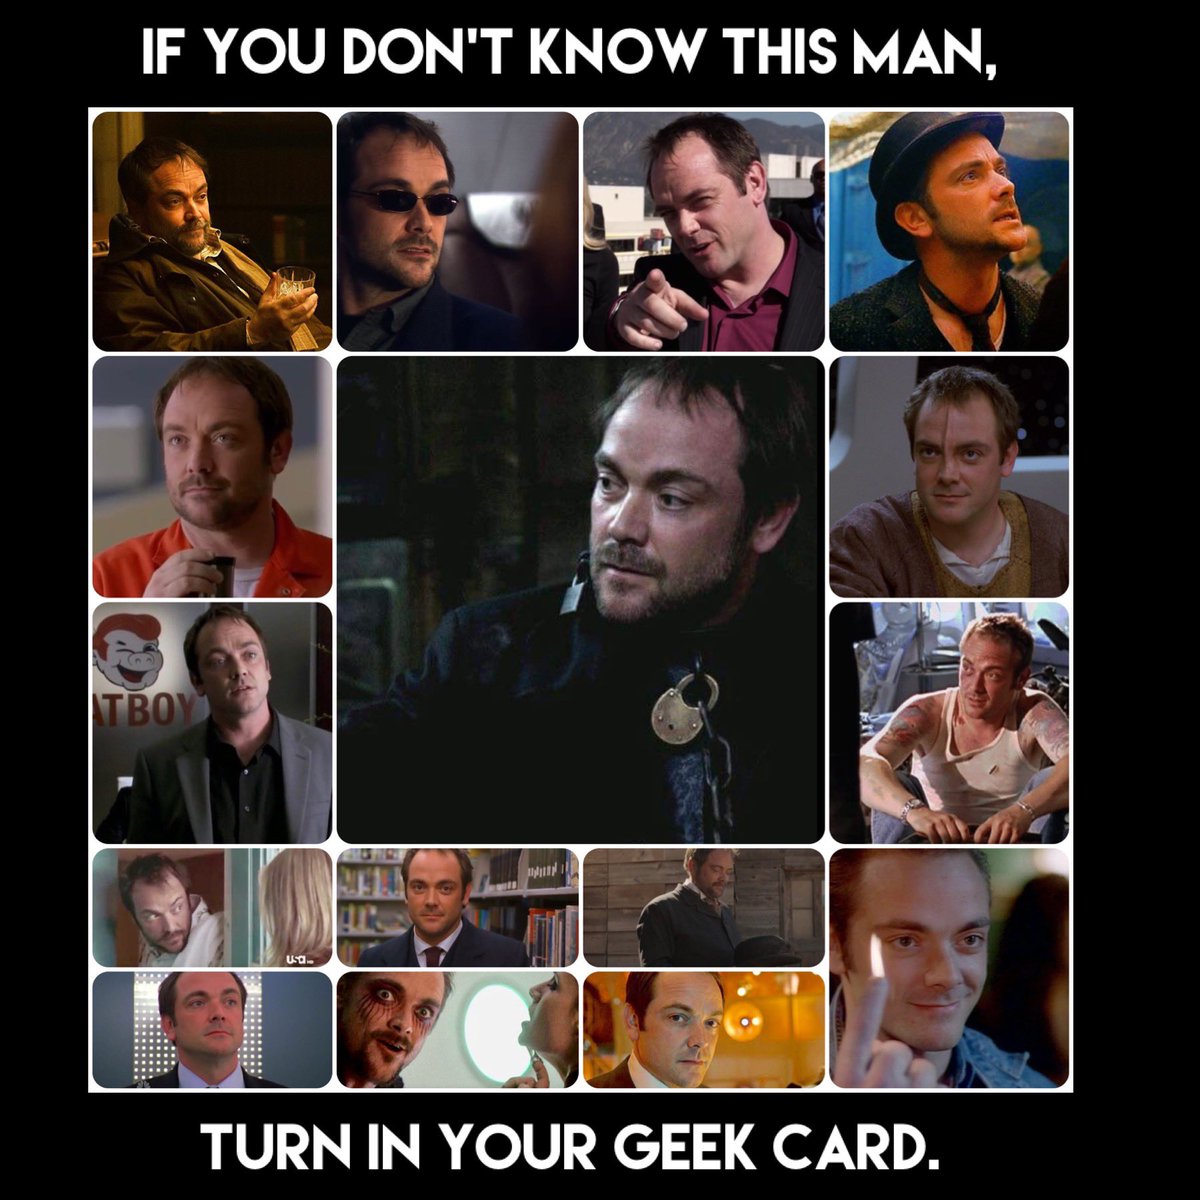 Drop a Mark Sheppard pic or gif and keep it going….
#SaveWalkerIndependence 
#MarkSheppard @Mark_Sheppard